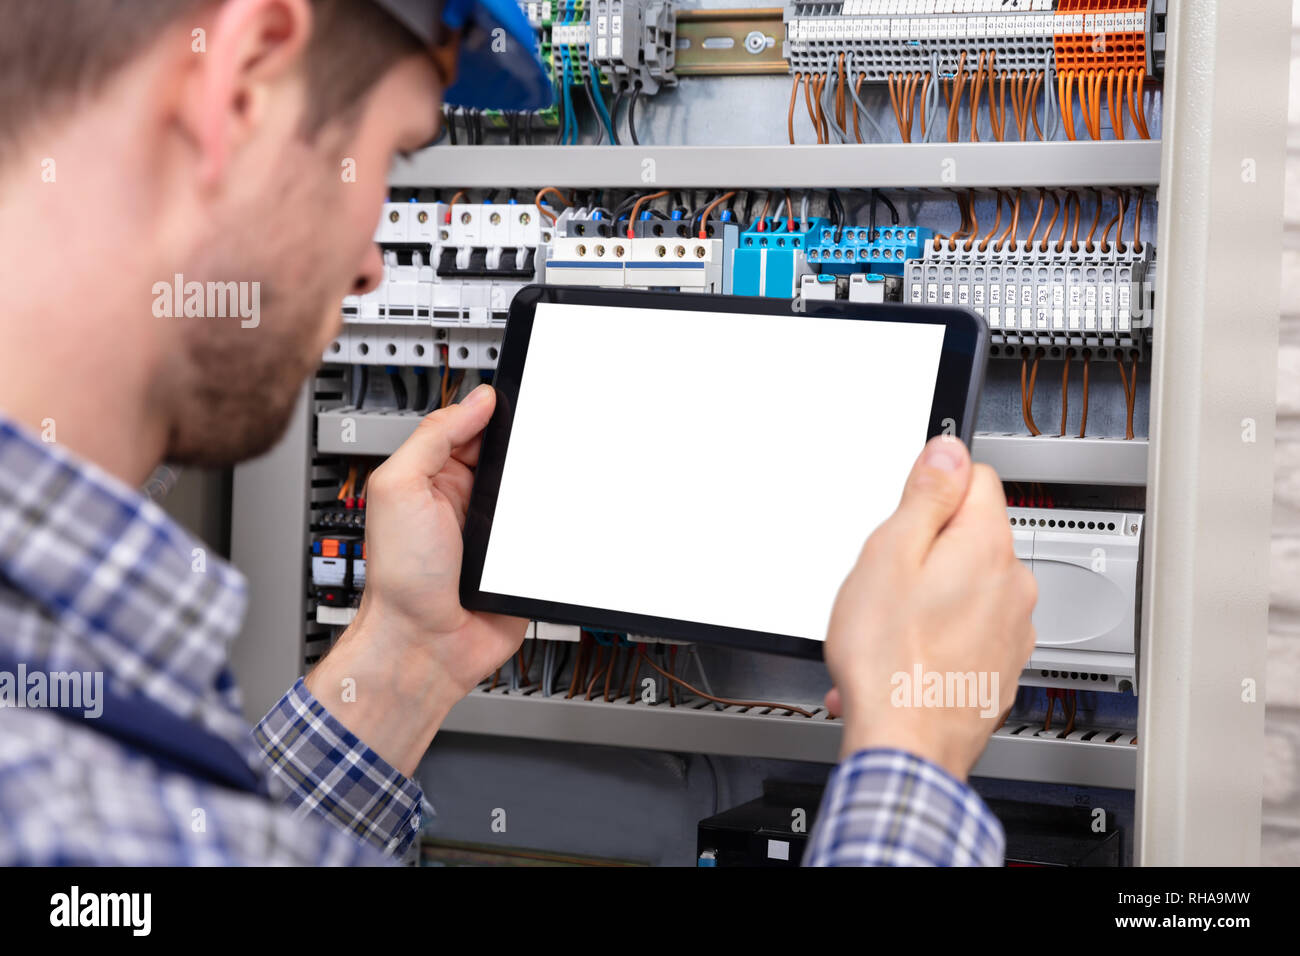 Technician Holding Digital Tablet With Blank Screen In Front Of Fuse Box Stock Photo